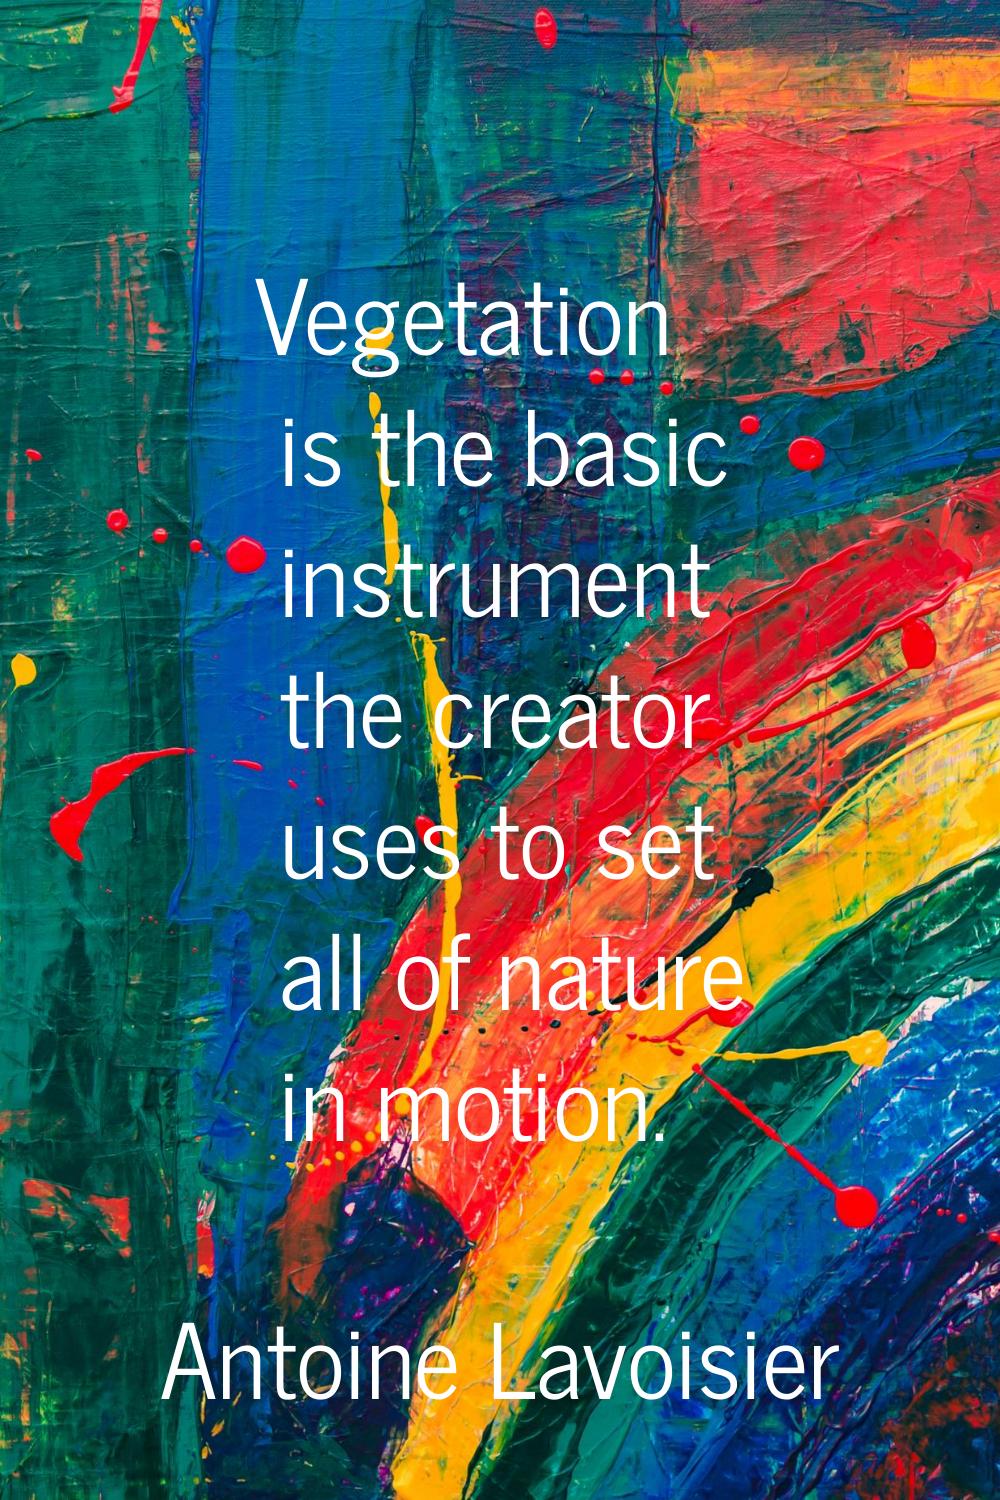 Vegetation is the basic instrument the creator uses to set all of nature in motion.